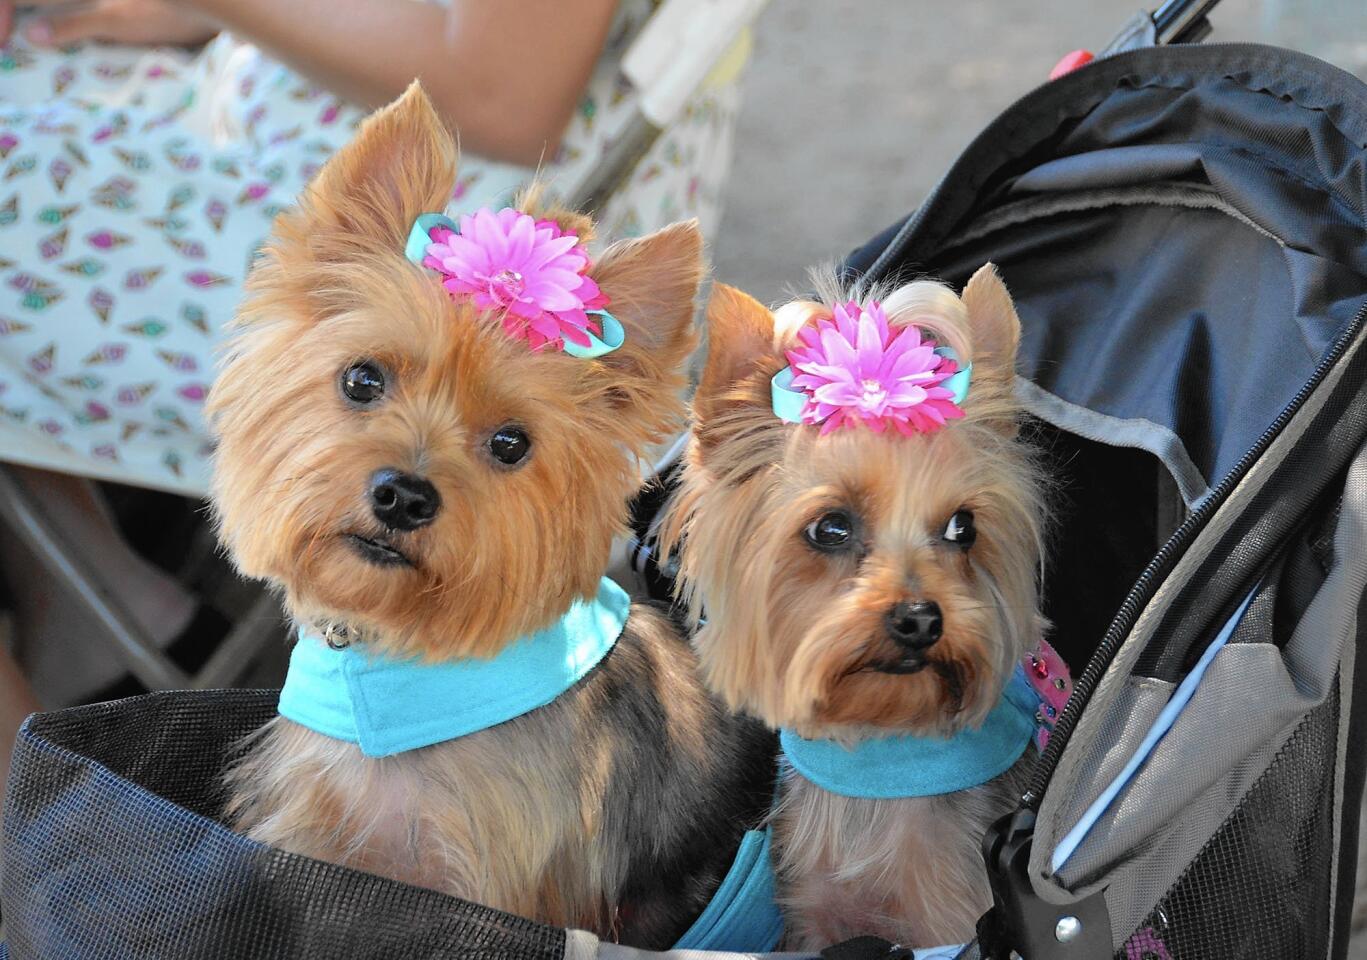 Skittle and Crickett came dressed in costumes as part of the Dapper Dog Social held at the Historic Heritage House of Orange County in Santa Ana.